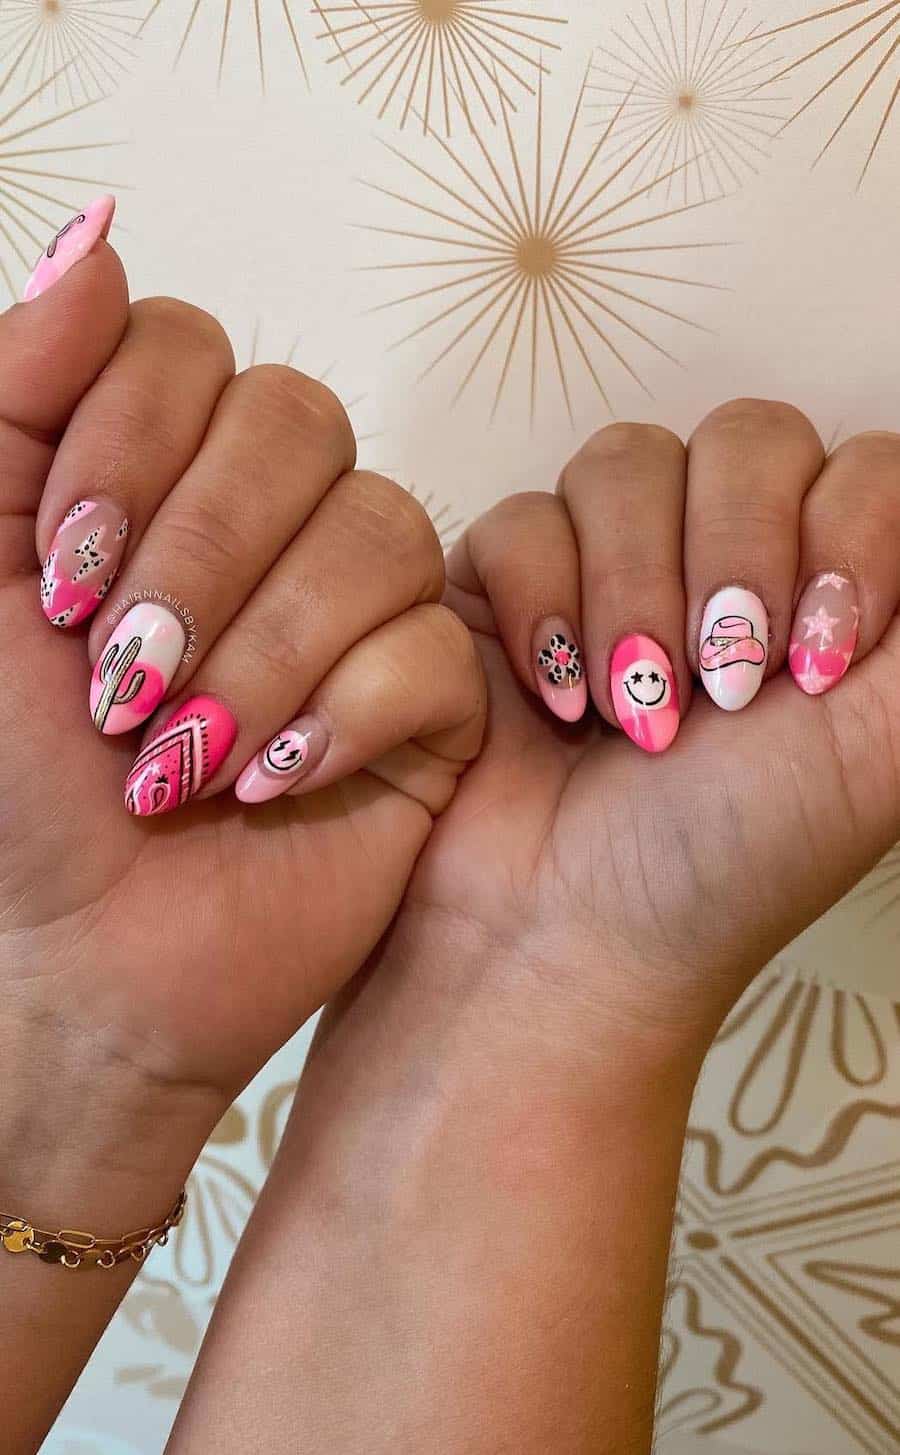 Medium almond nails featuring pink and white Western collage style designs